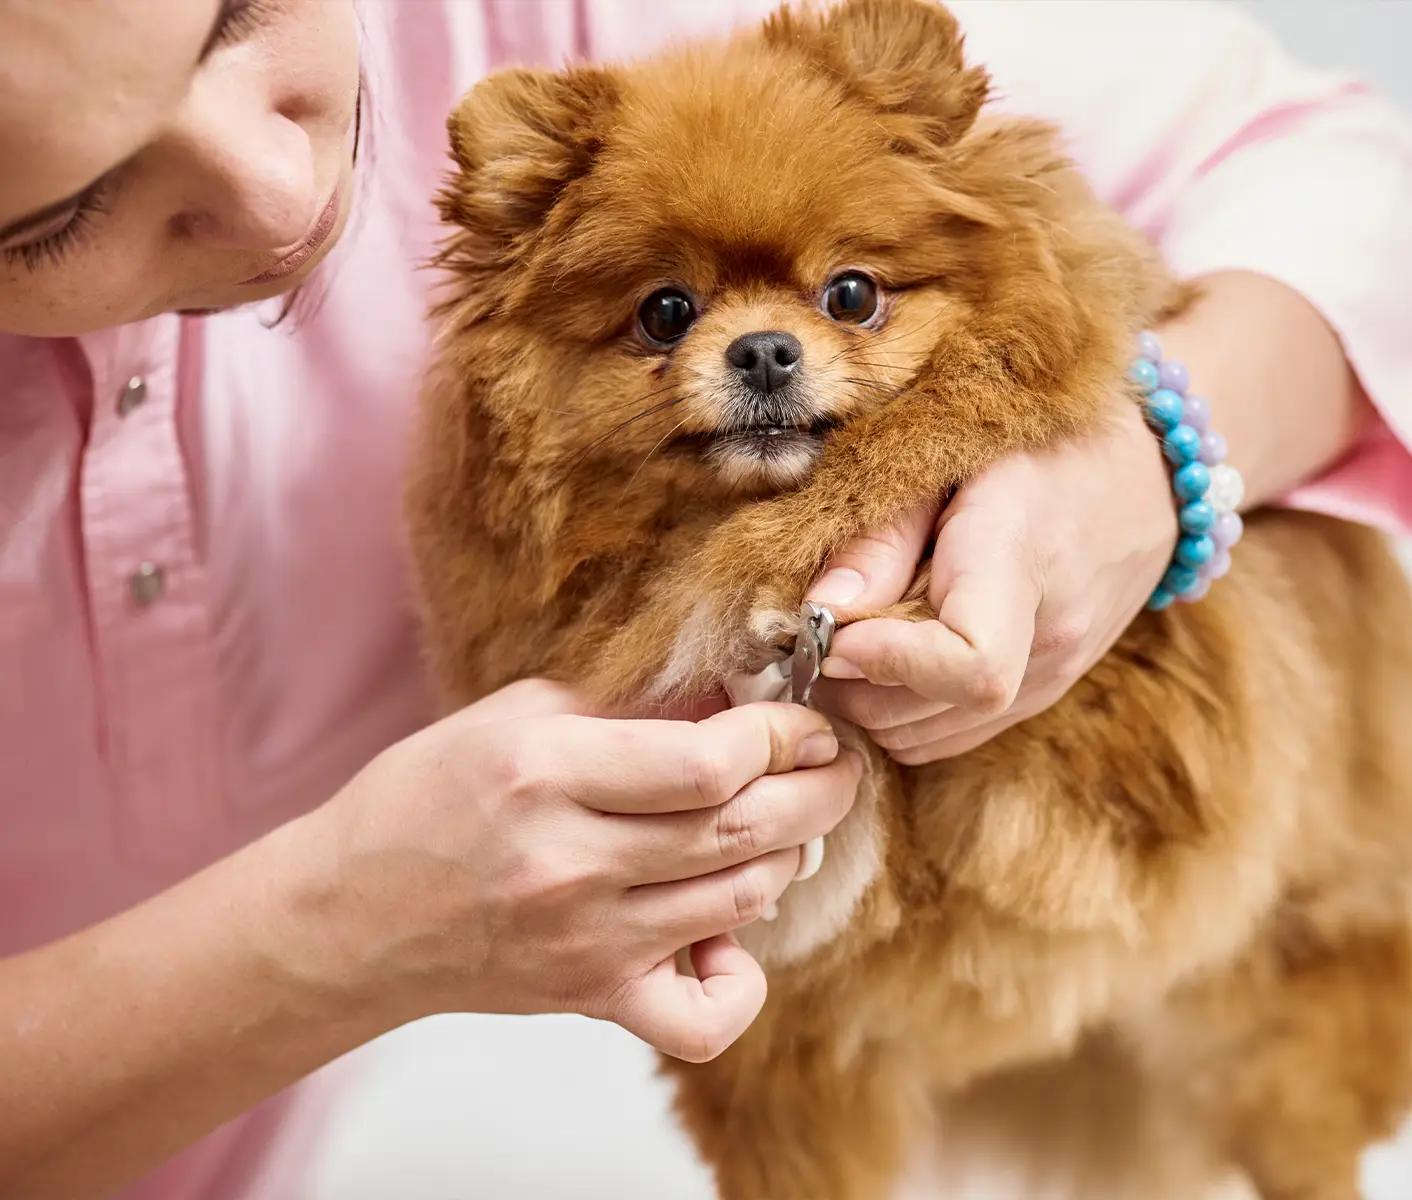 How To Use Nail Clippers For Dogs: 7 Steps Guide – RexiPets